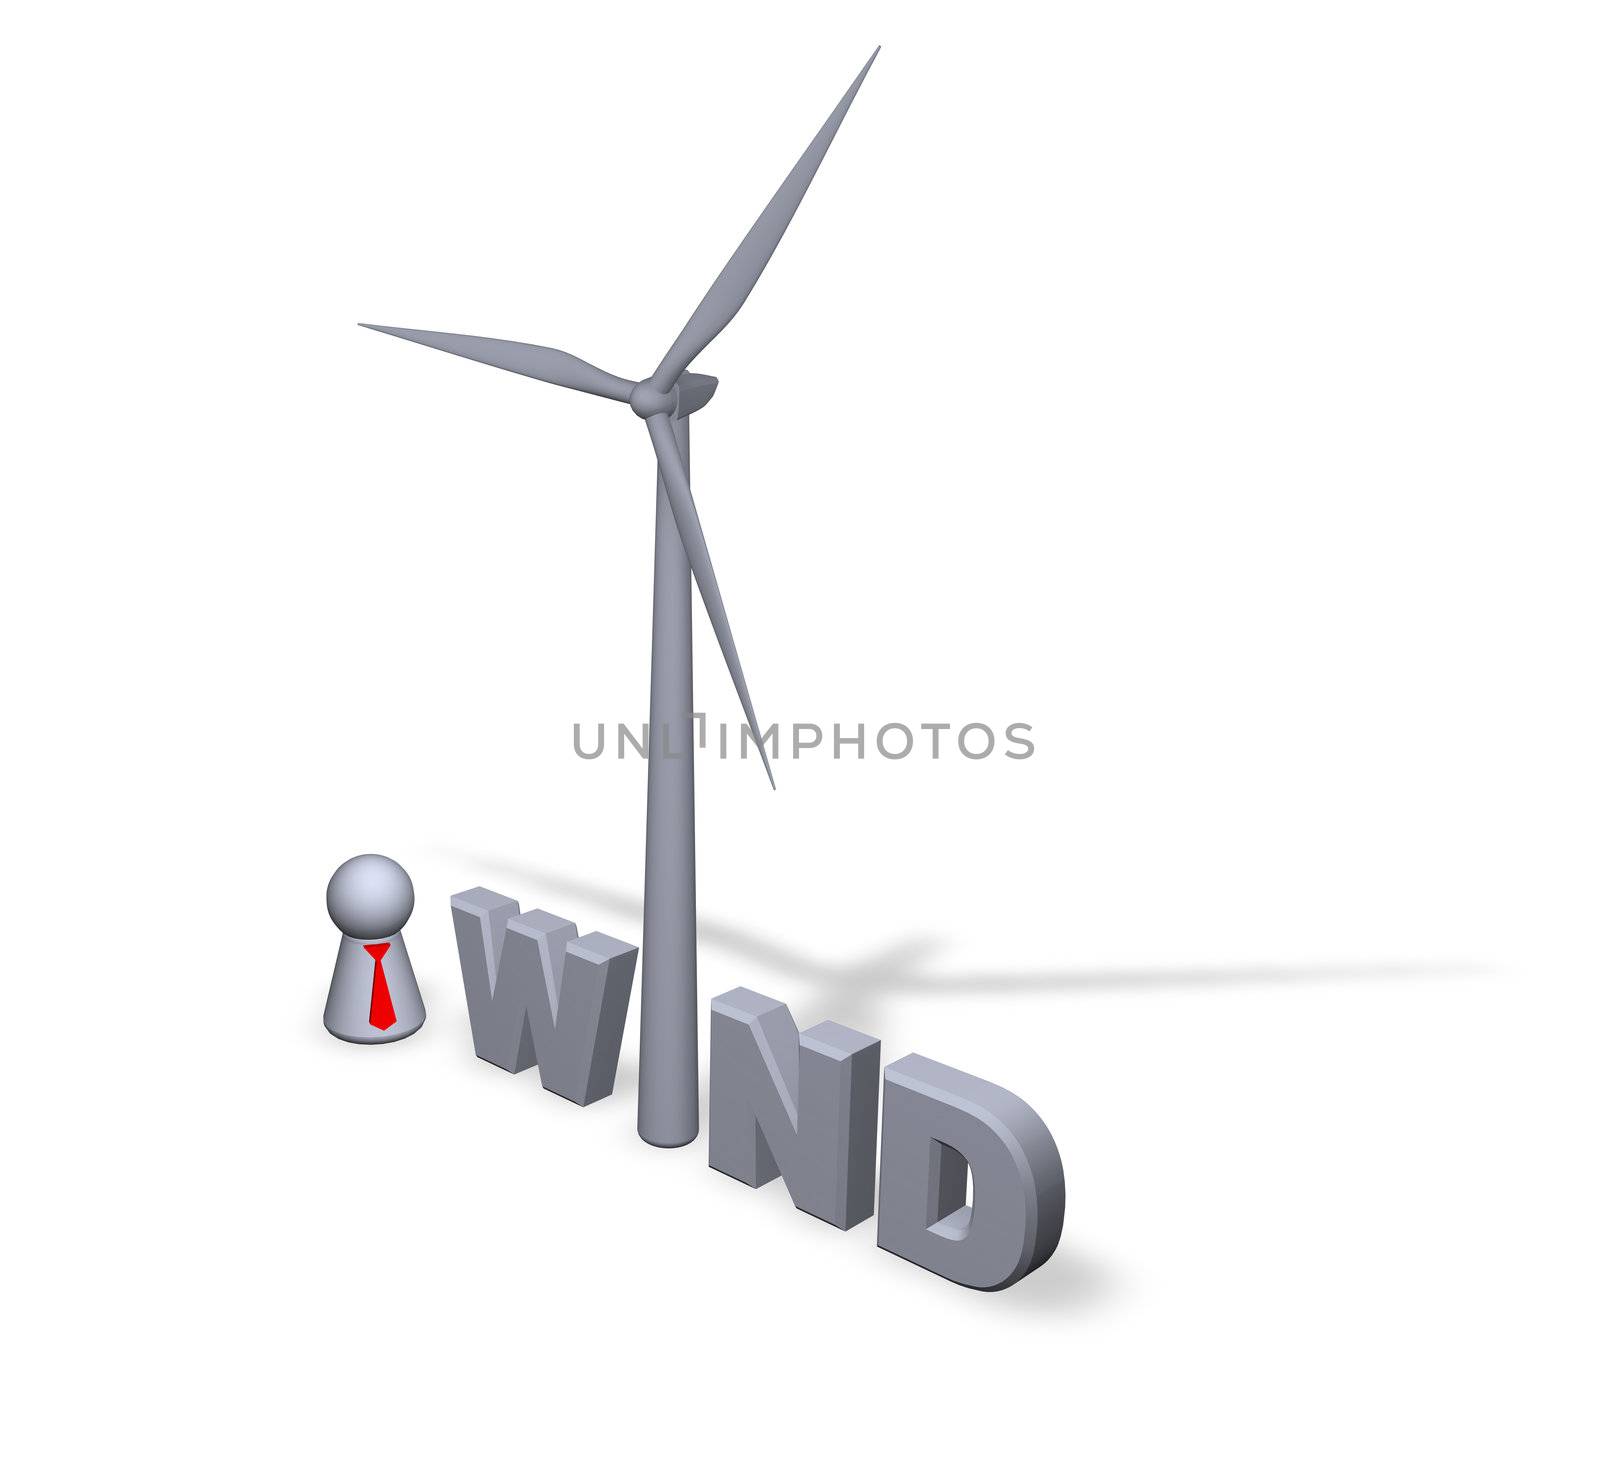 wind text in 3d, wind turbine and play figure businessman